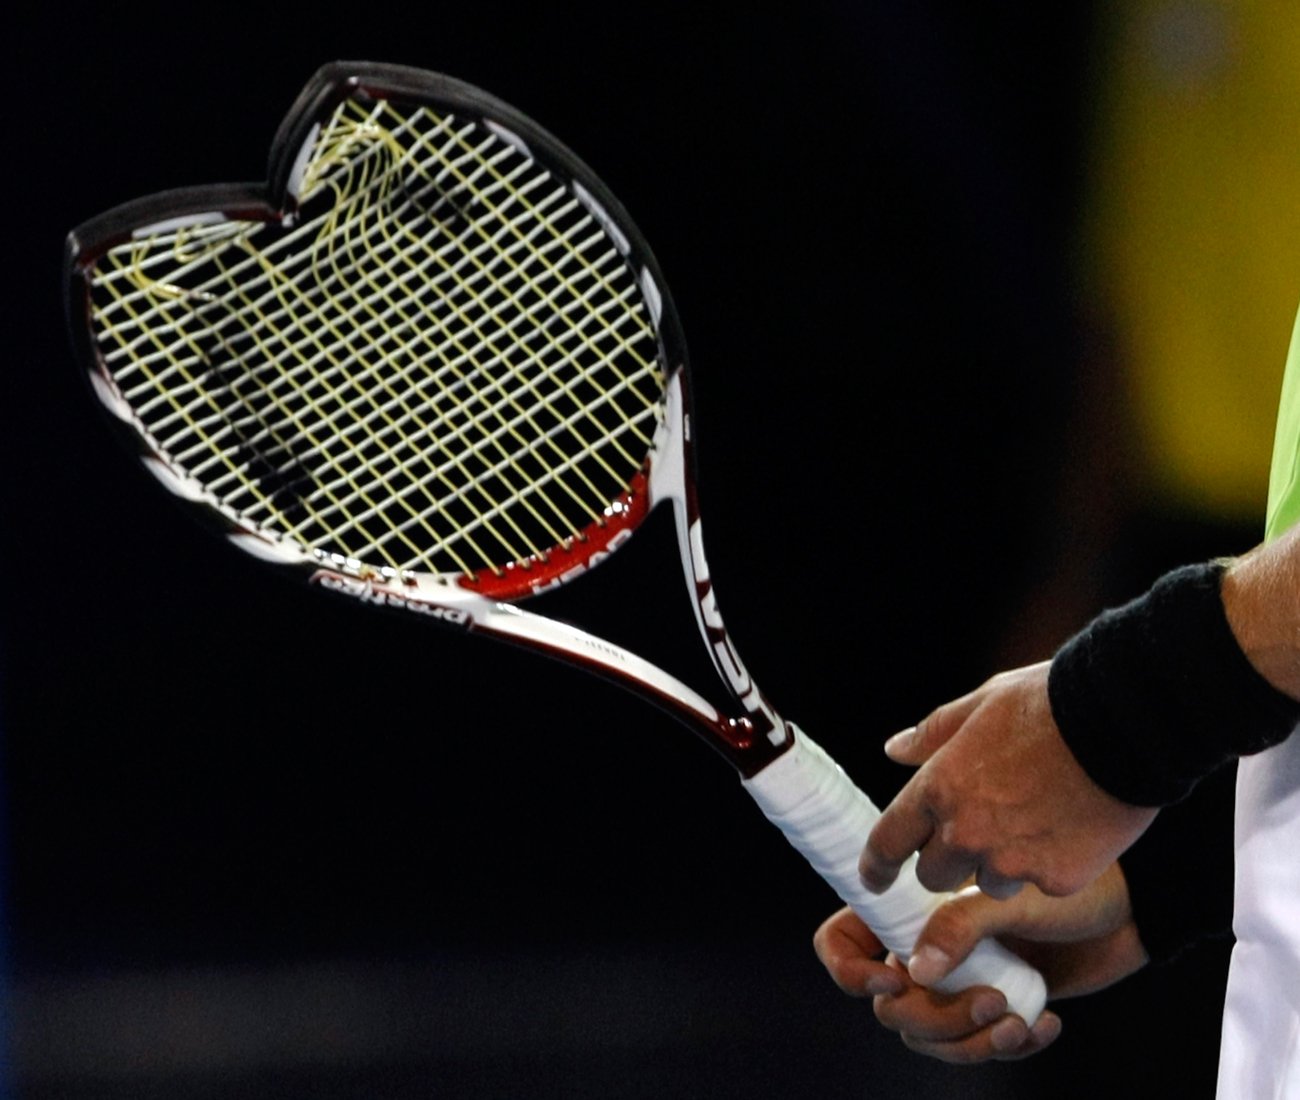 Russia&#39s Marat Safin&#39s broken racket is seen after he threw it at the ground during his match against Marcos Baghdatis of Cyprus at the Australian Open tennis tournament in Melbourne January 17, 2008. 